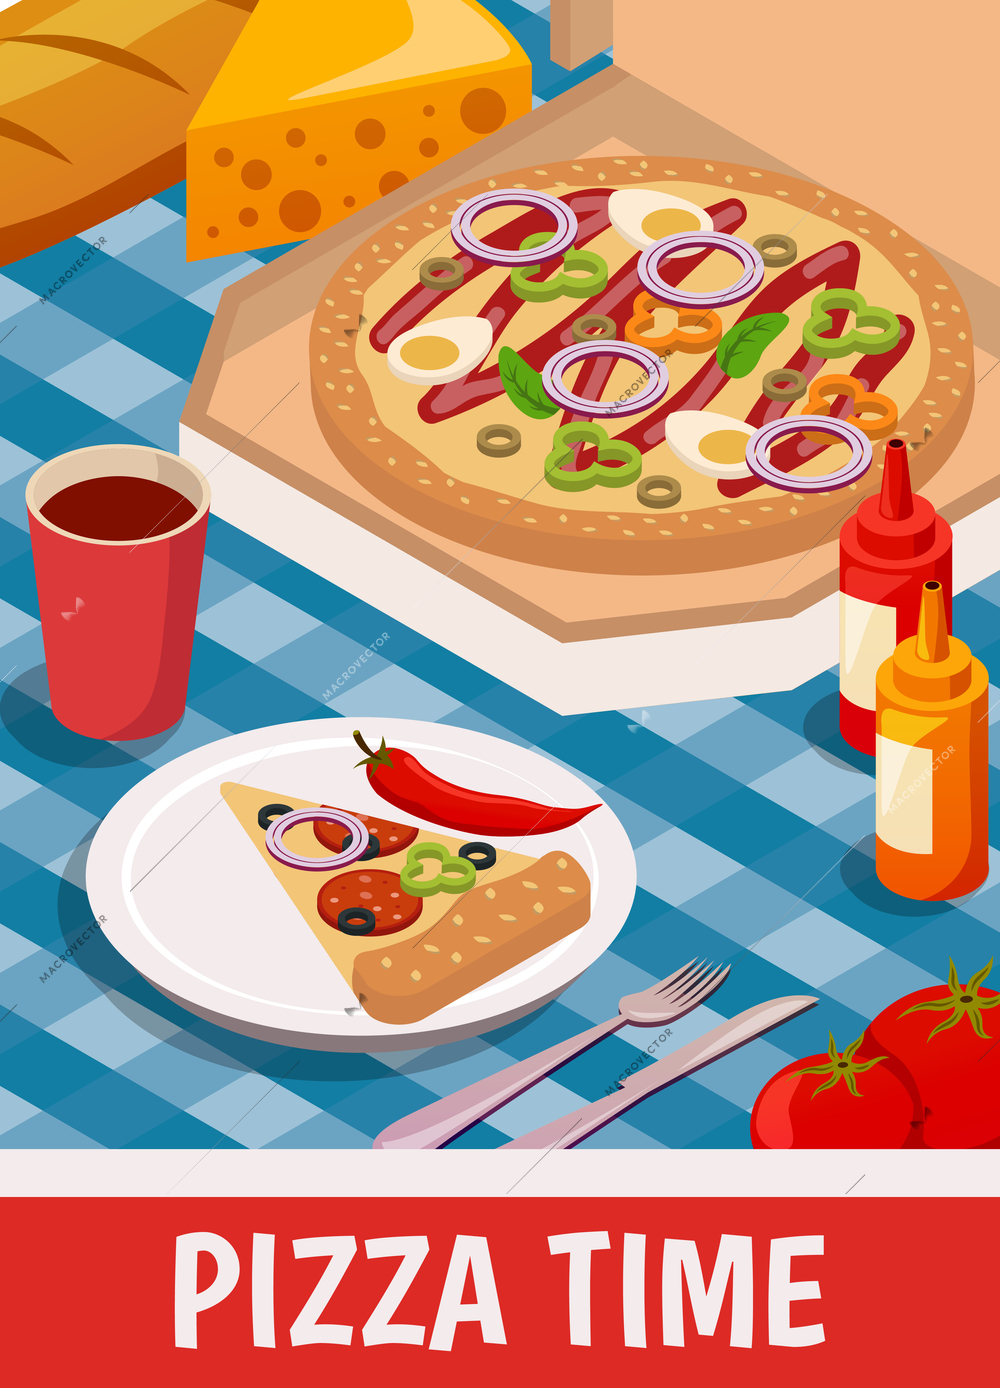 Pizza time isometric poster with slice of product on plate with cutlery, drink and sauces vector illustration